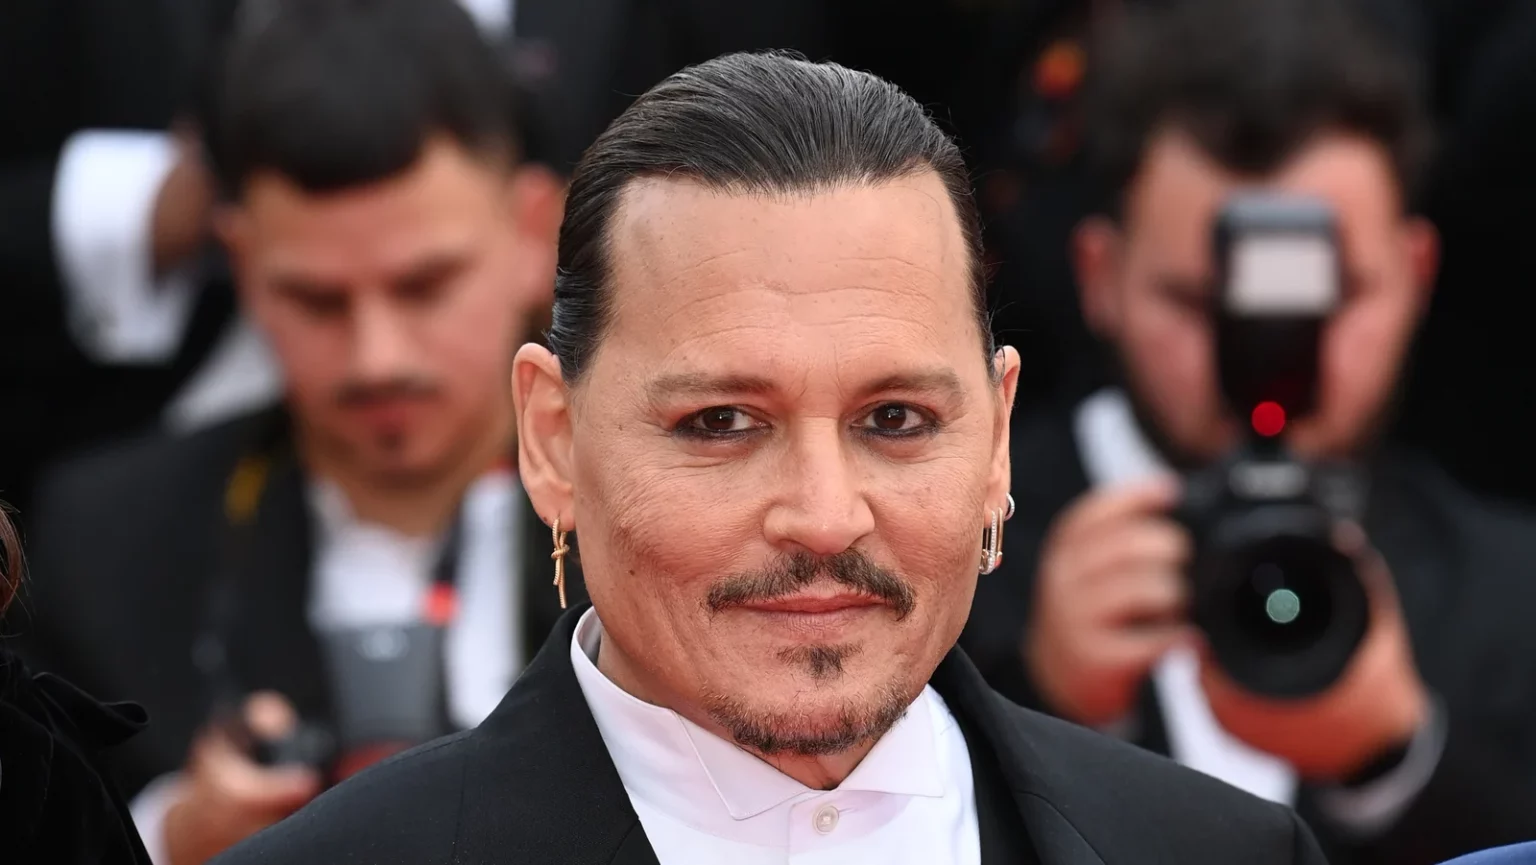 johnny-depp-receives-standing-ovation-at-cannes-film-festival